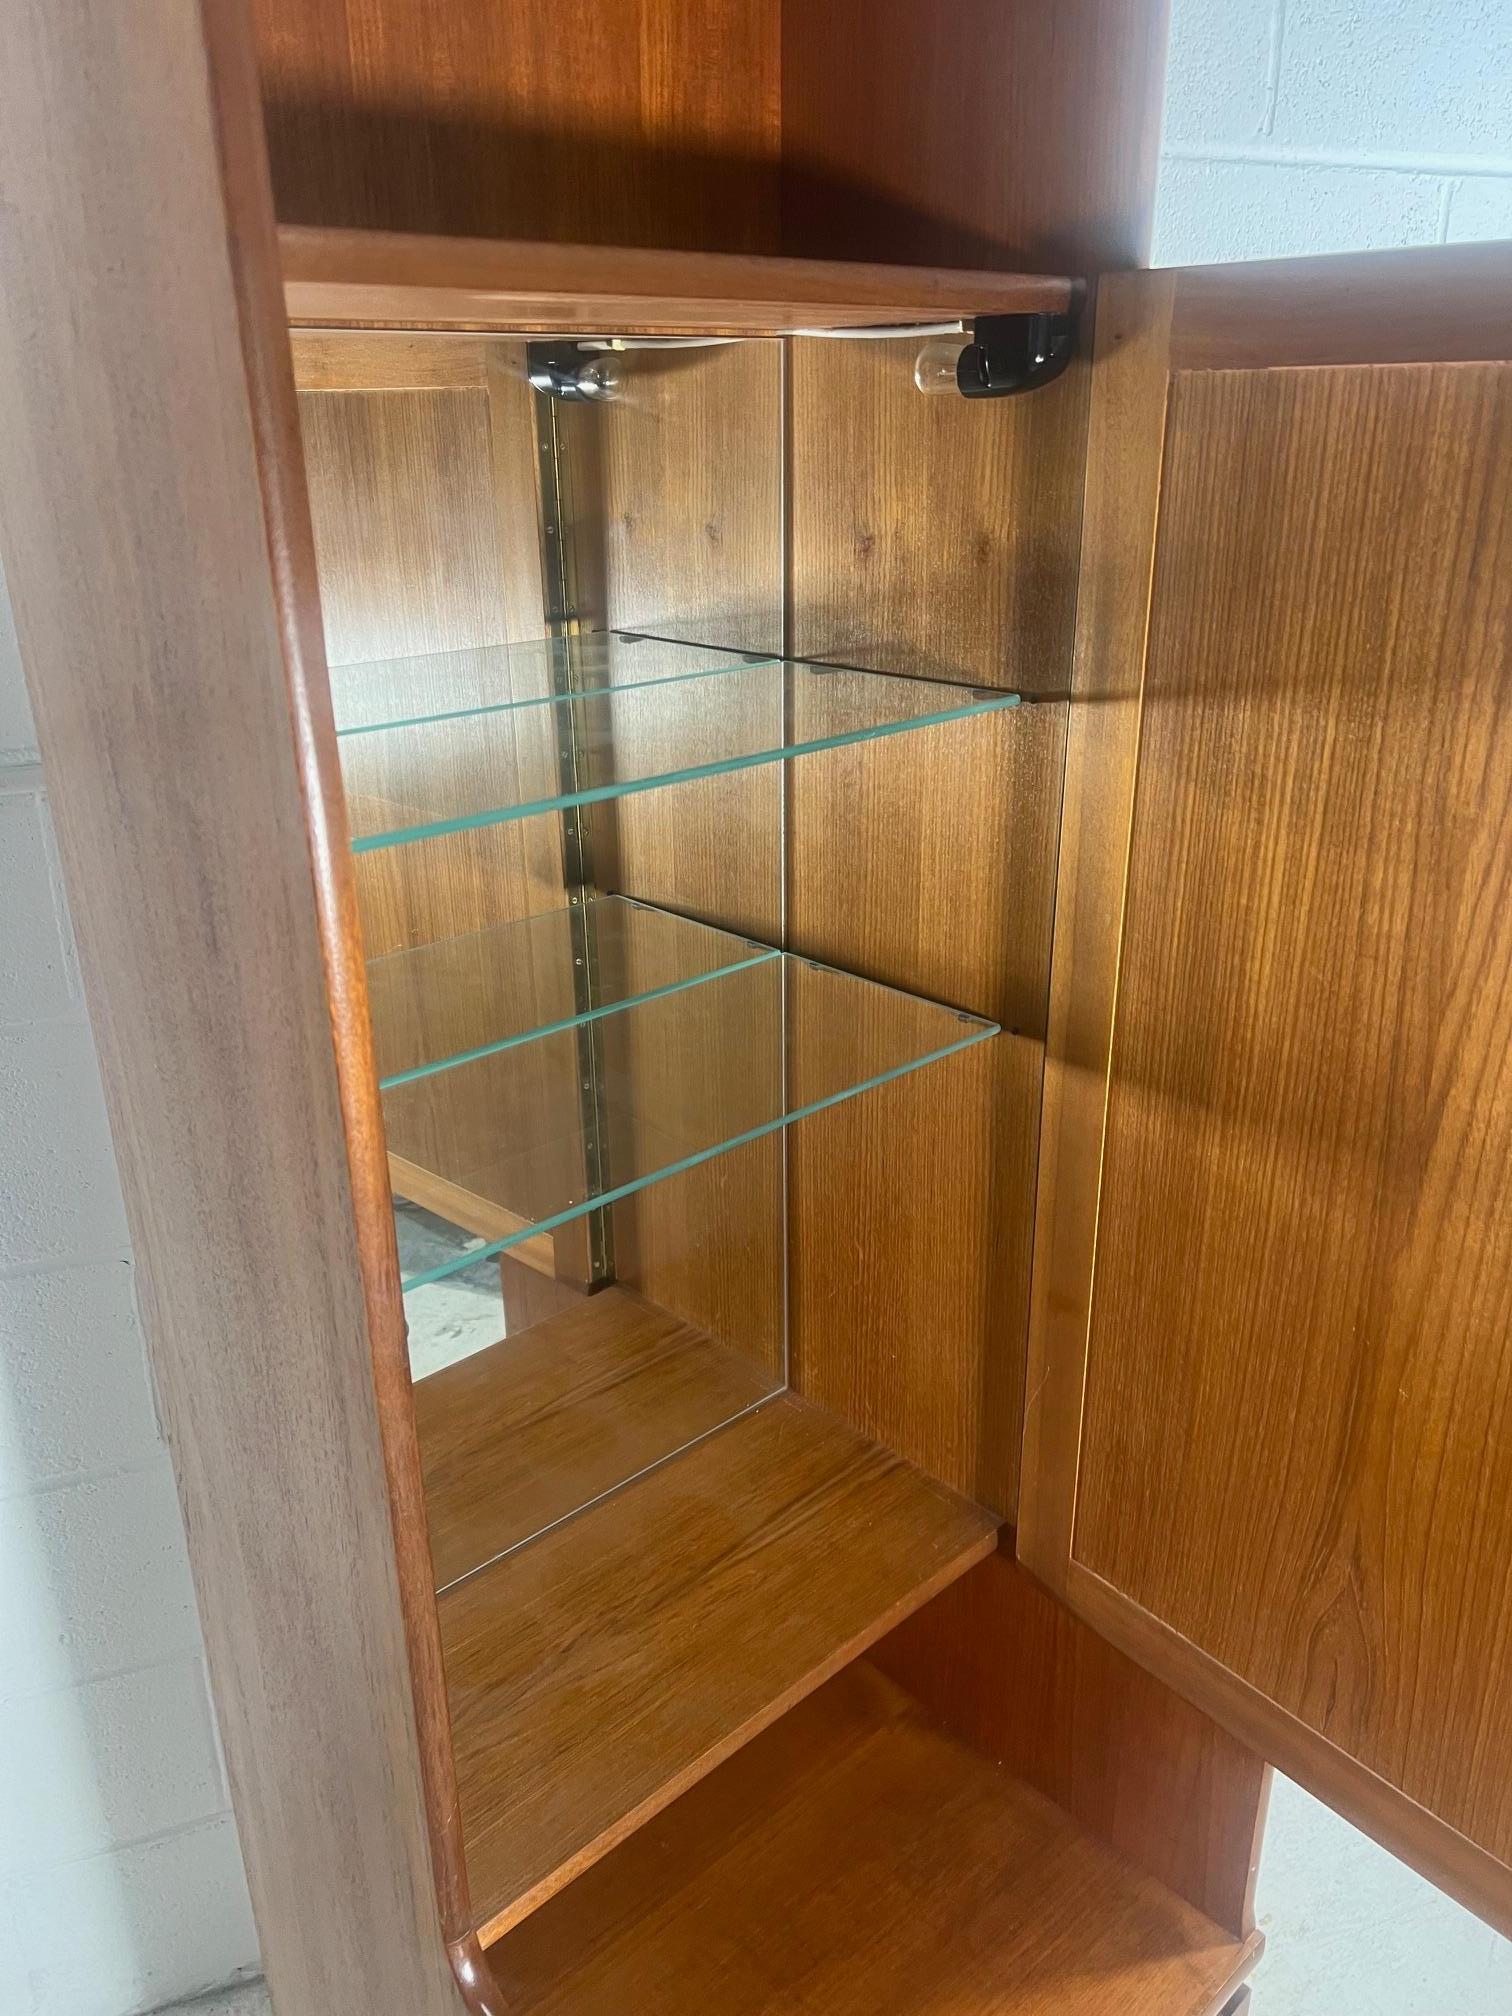 Tall and narrow teak drinks cabinet with bar. Comes with lock and key.

Very good condition. Minor marks. There is a light at the top. Light bulb is missing and it needs to be rewired for US use.

Dimensions: L x D x H

20.25